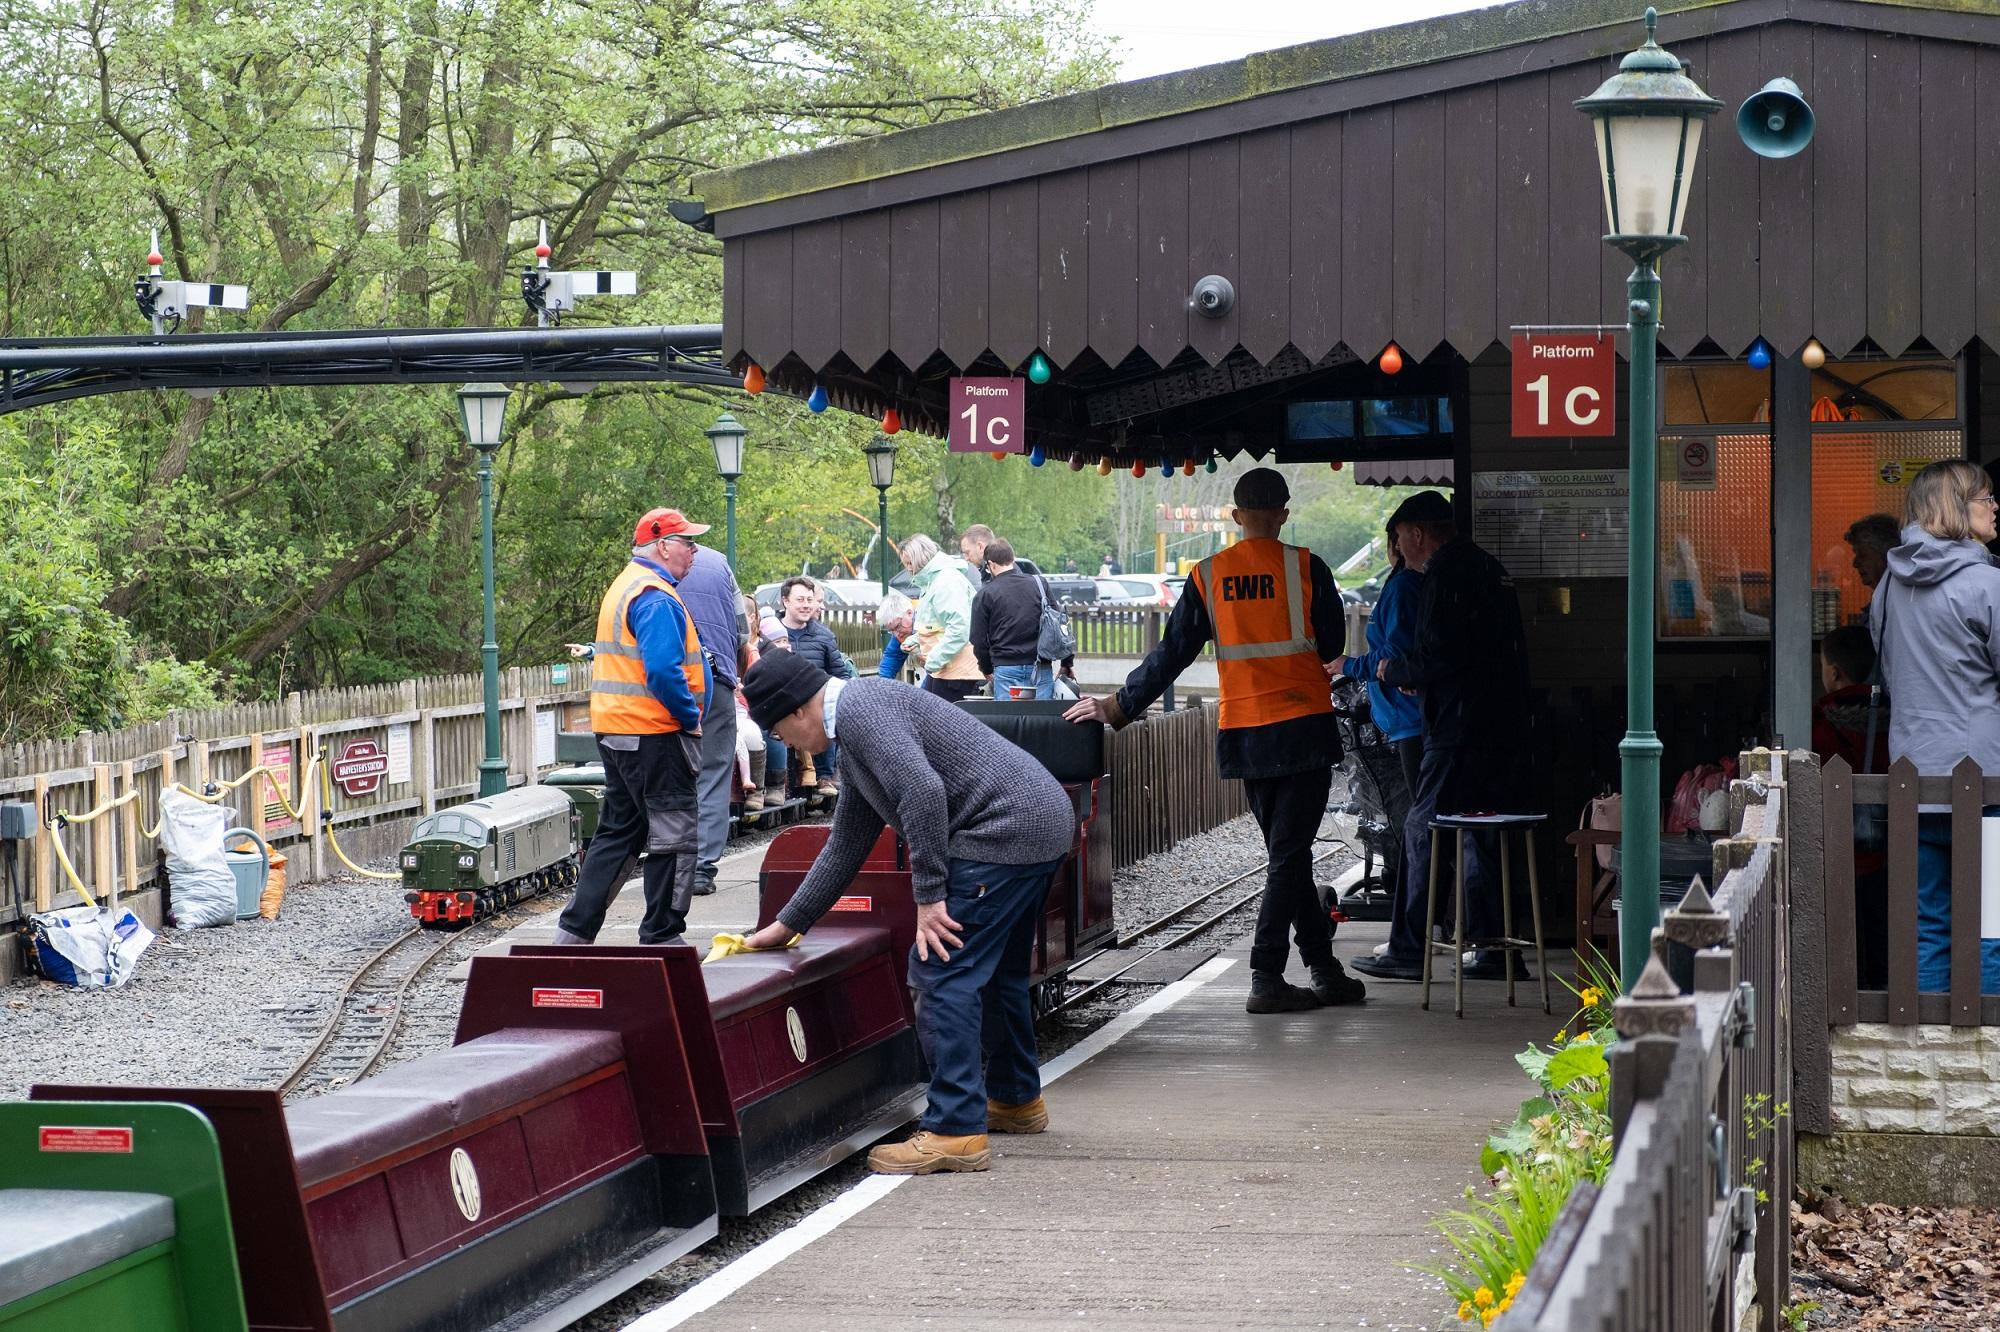 Photograph of the main station on the Echills Wood Railway, including train staff and members of the public.